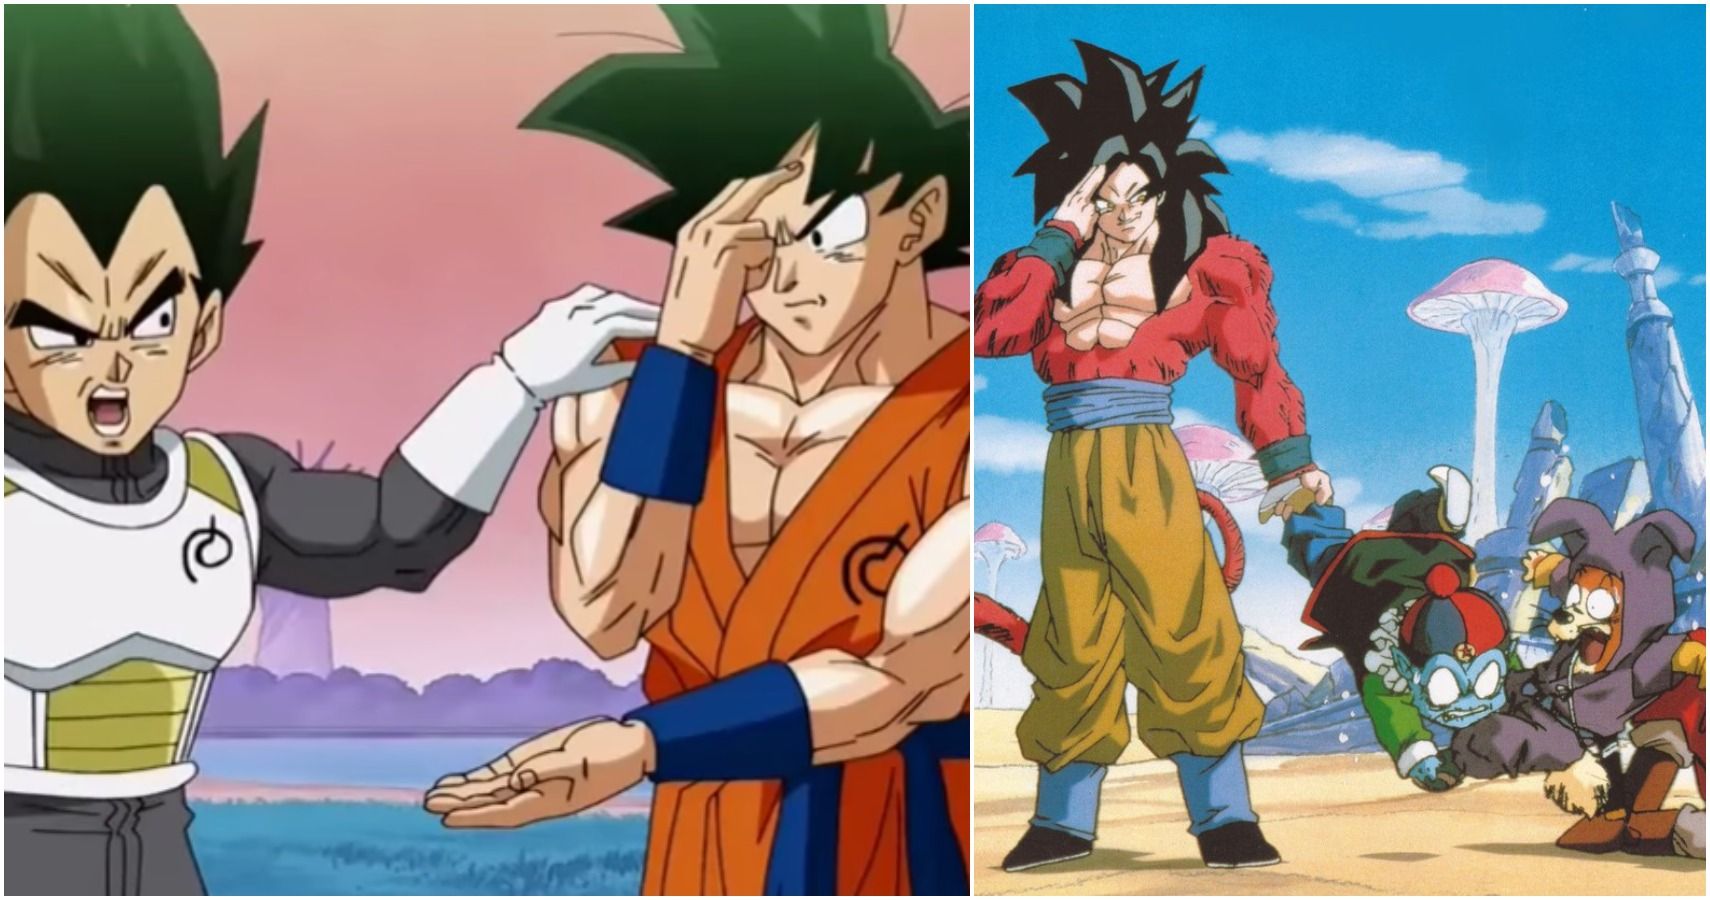 Dragon Ball, Dragon Ball Z and Dragon Ball GT arrive to